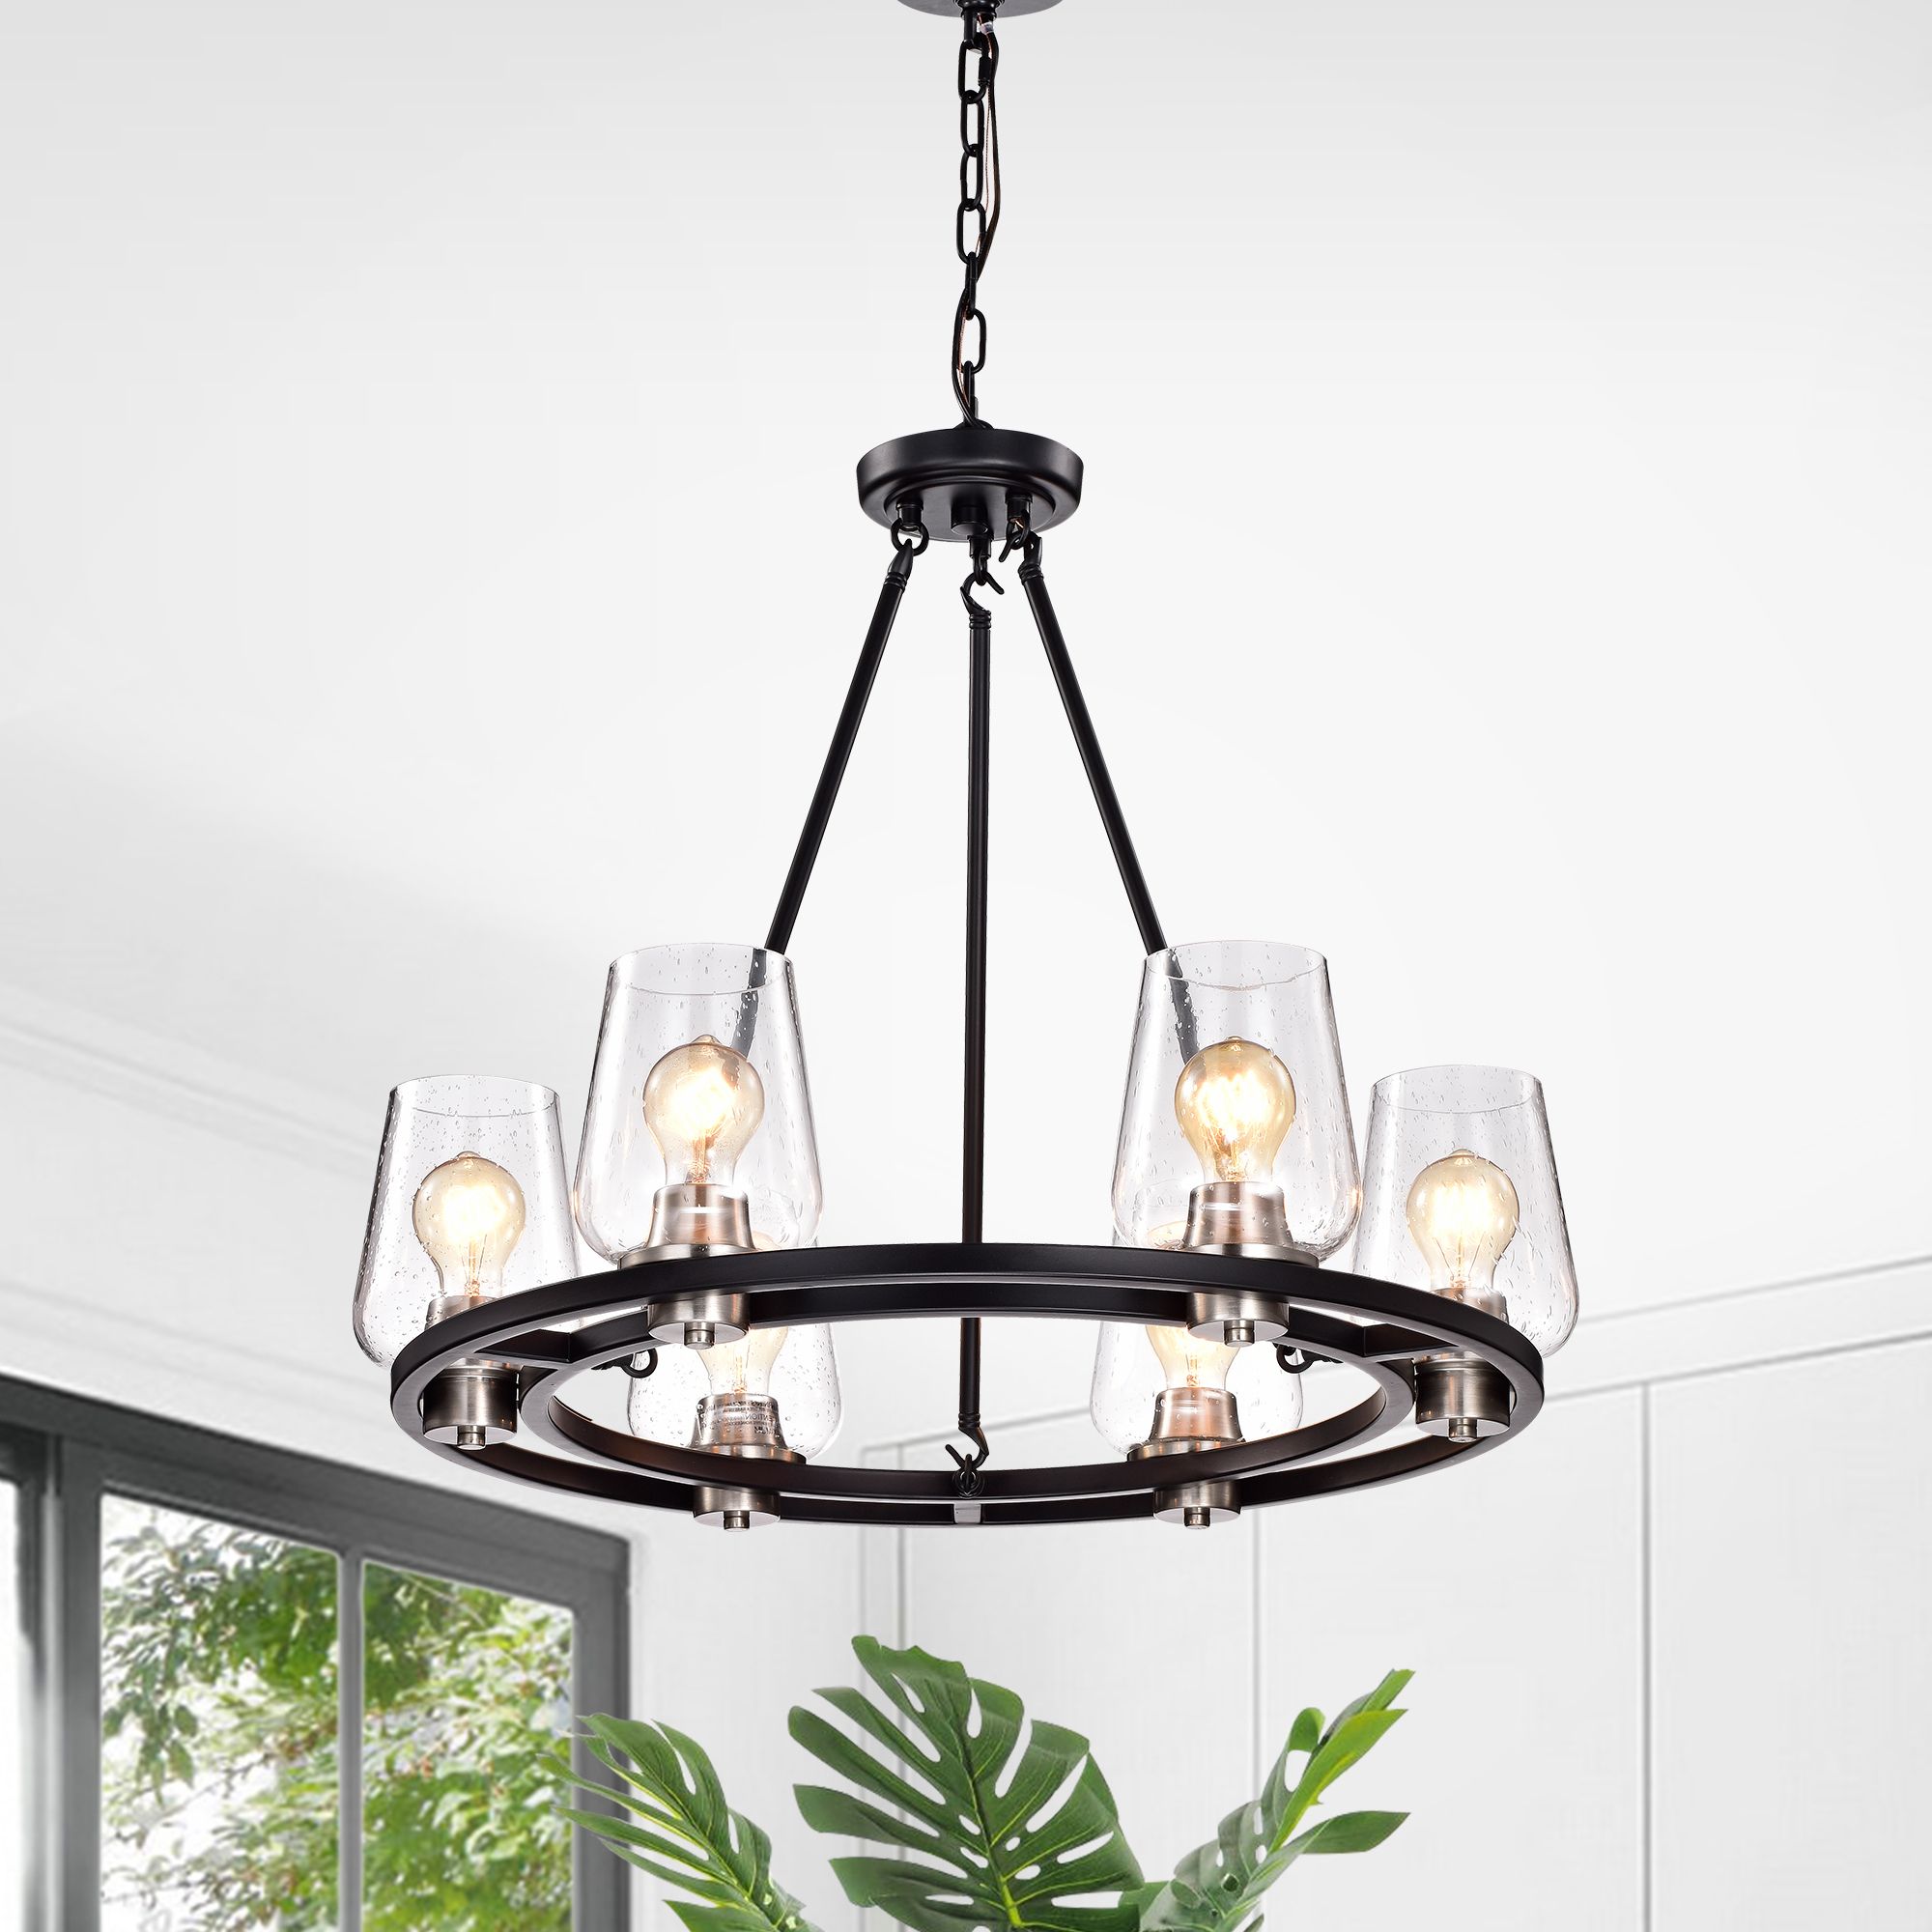 6 Light Black And Brushed Nickel Circular Chandelier With Inside 2019 Six Light Chandeliers (View 5 of 15)